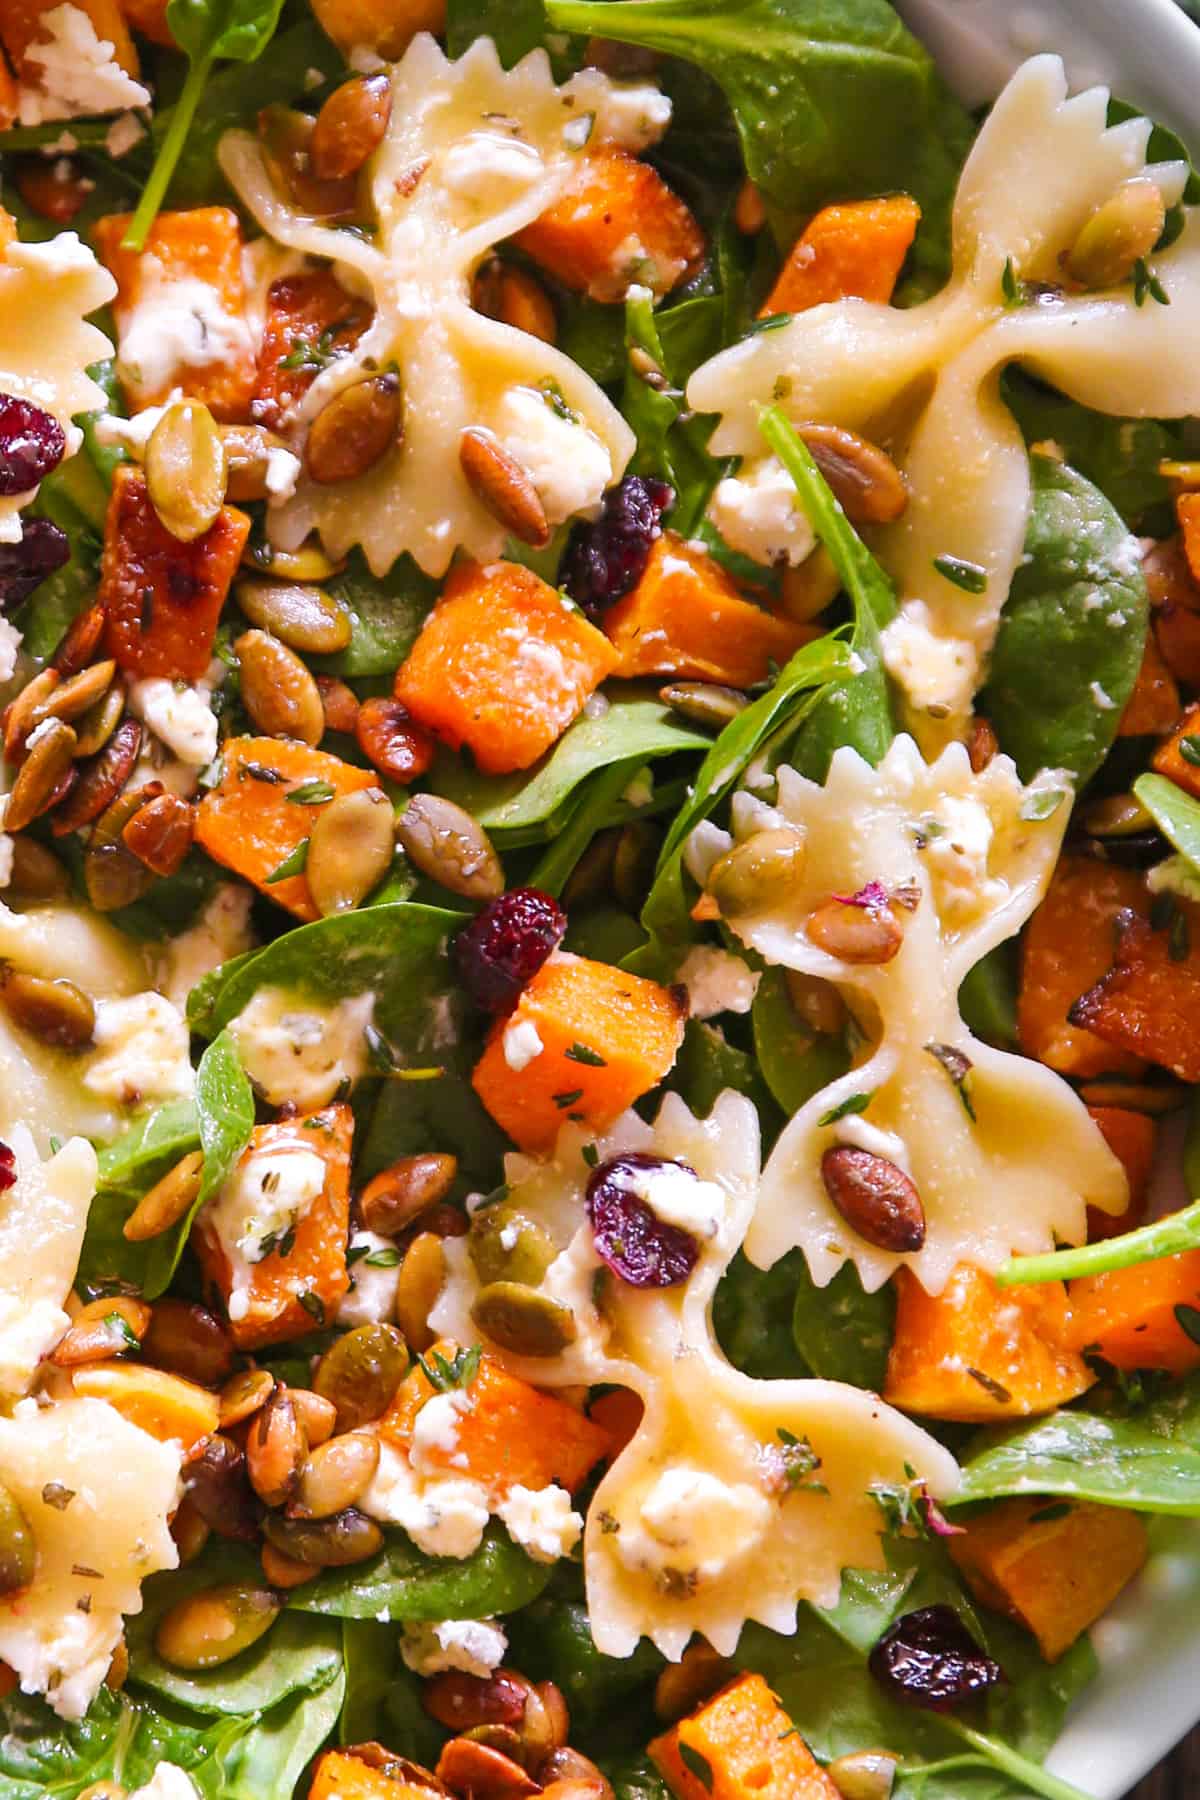 Fall Salad with roasted butternut squash, toasted pumpkin seeds, dried cranberries, baby spinach, creamy goat cheese, and bow-tie pasta - close-up photo.